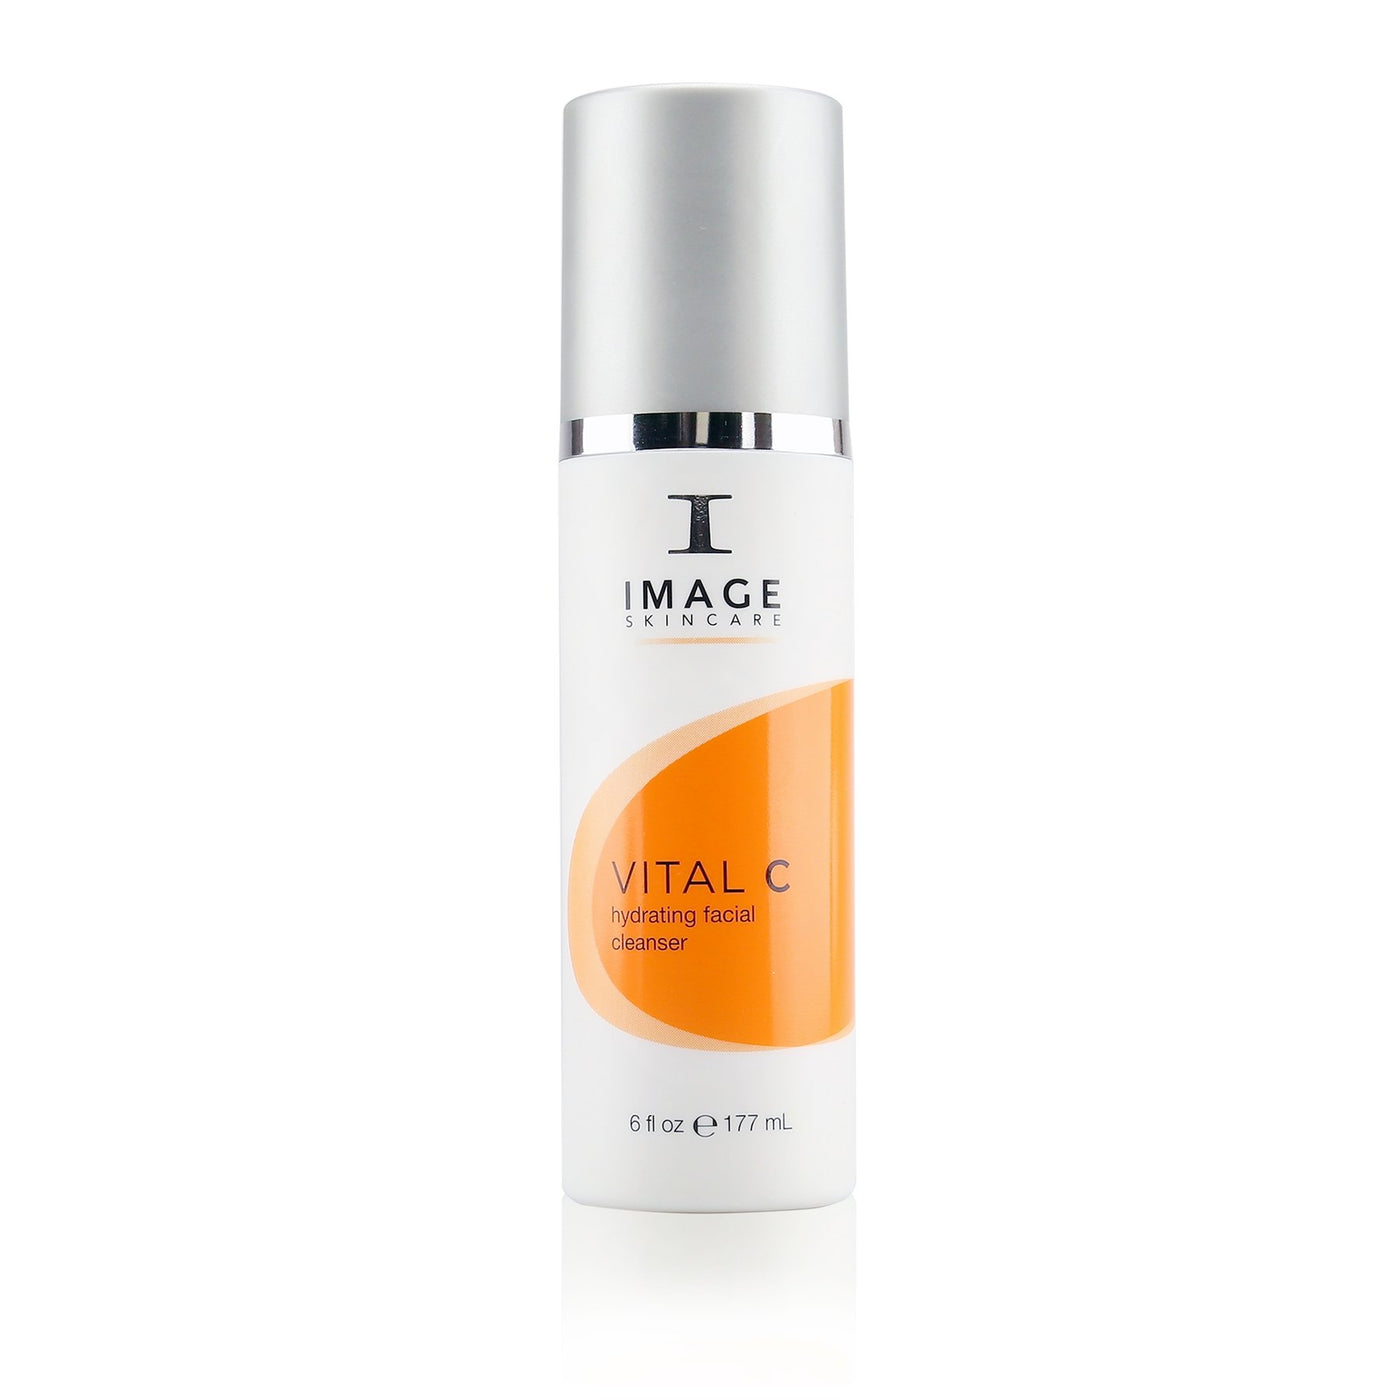 VITAL C hydrating facial cleanser 6oz - The Skin Beauty Shoppe